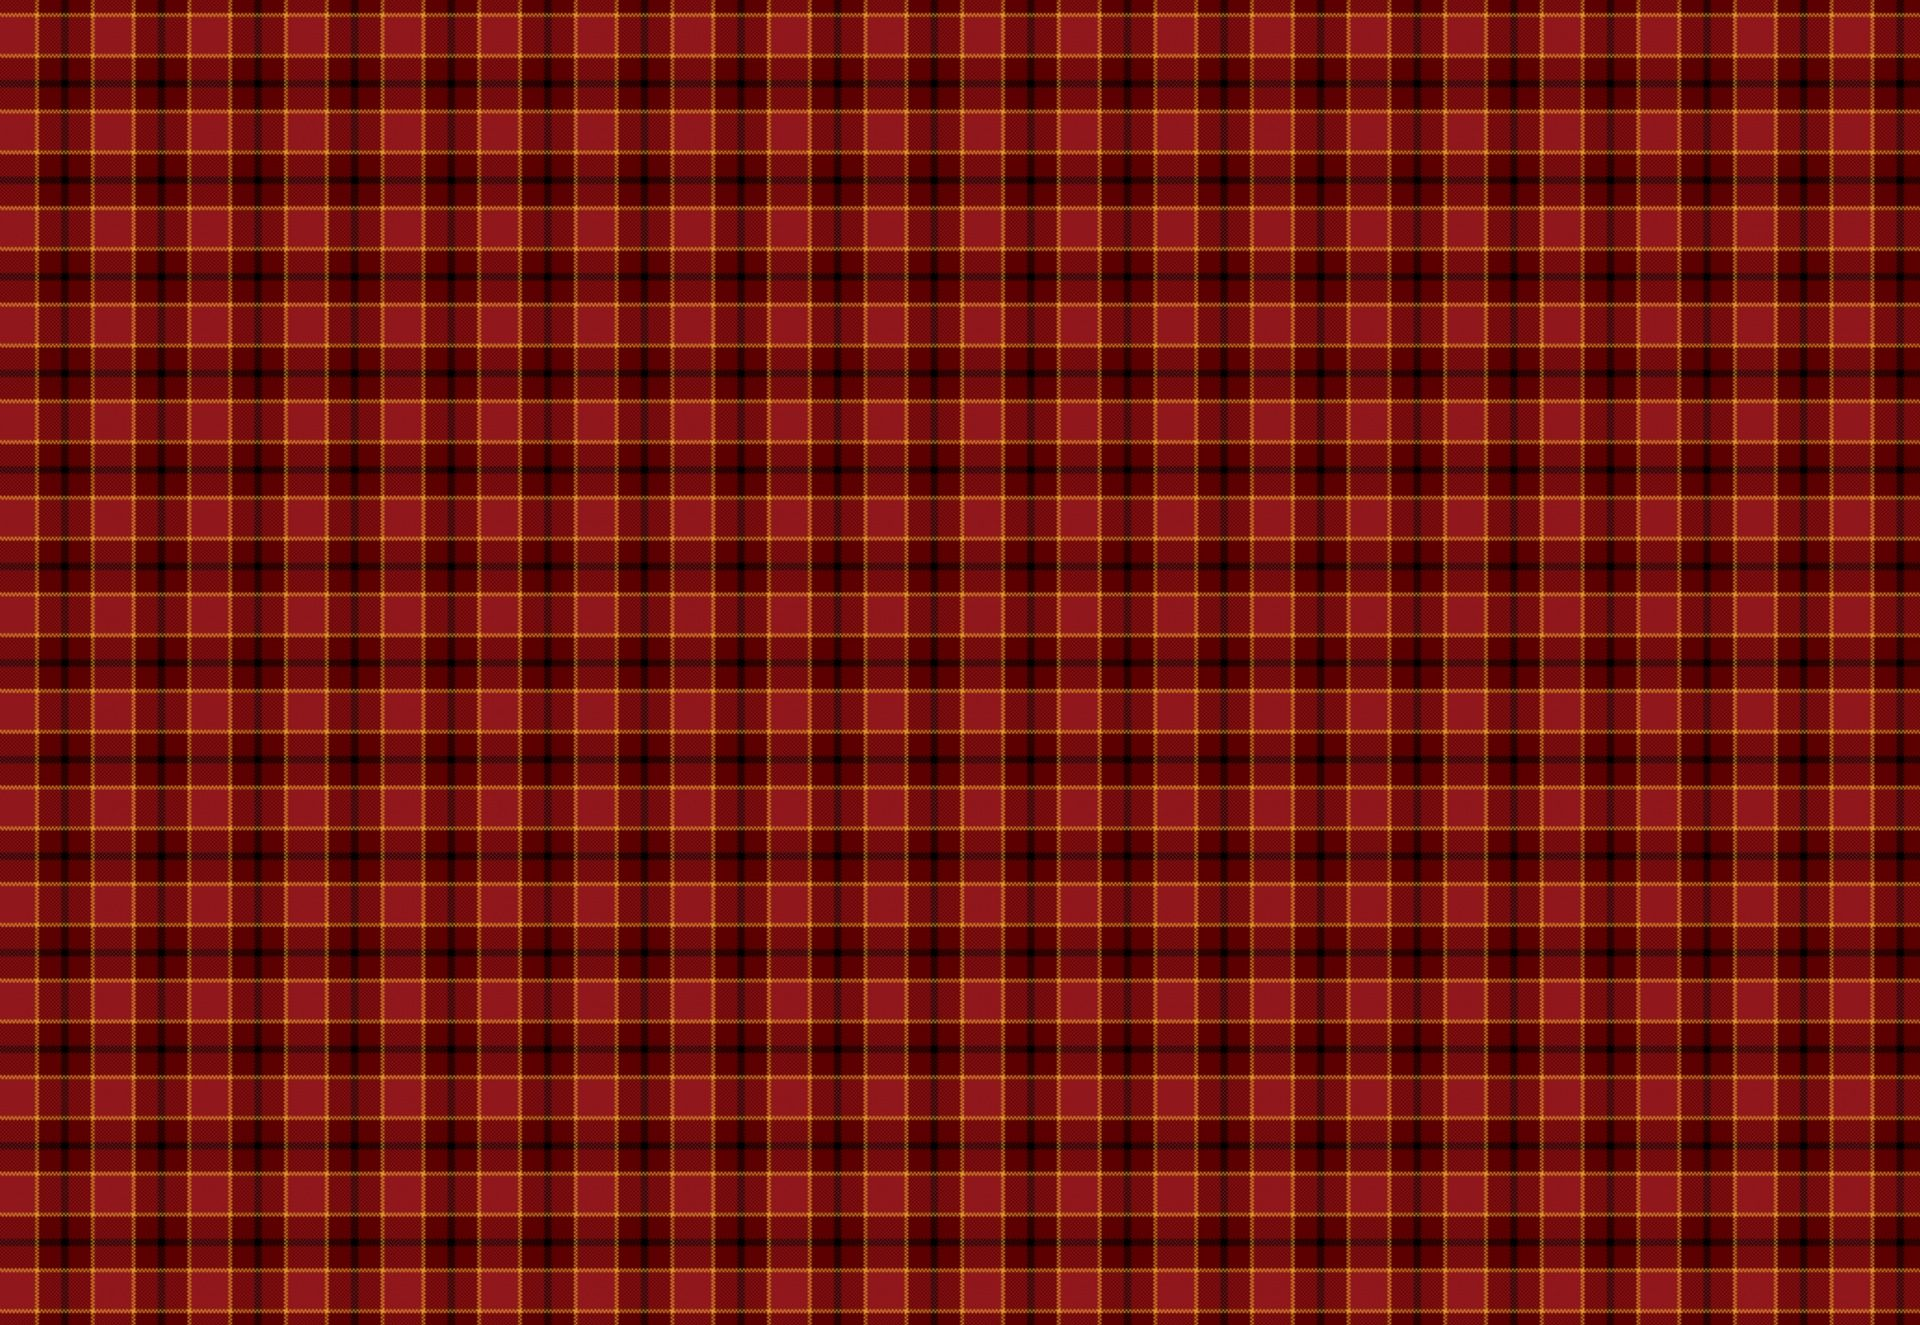 1920x1325 Tartan Plaid Red Christmas Paper Free Stock Photo Public Domain Pictures | Red christmas, Christmas paper, Christmas placemats